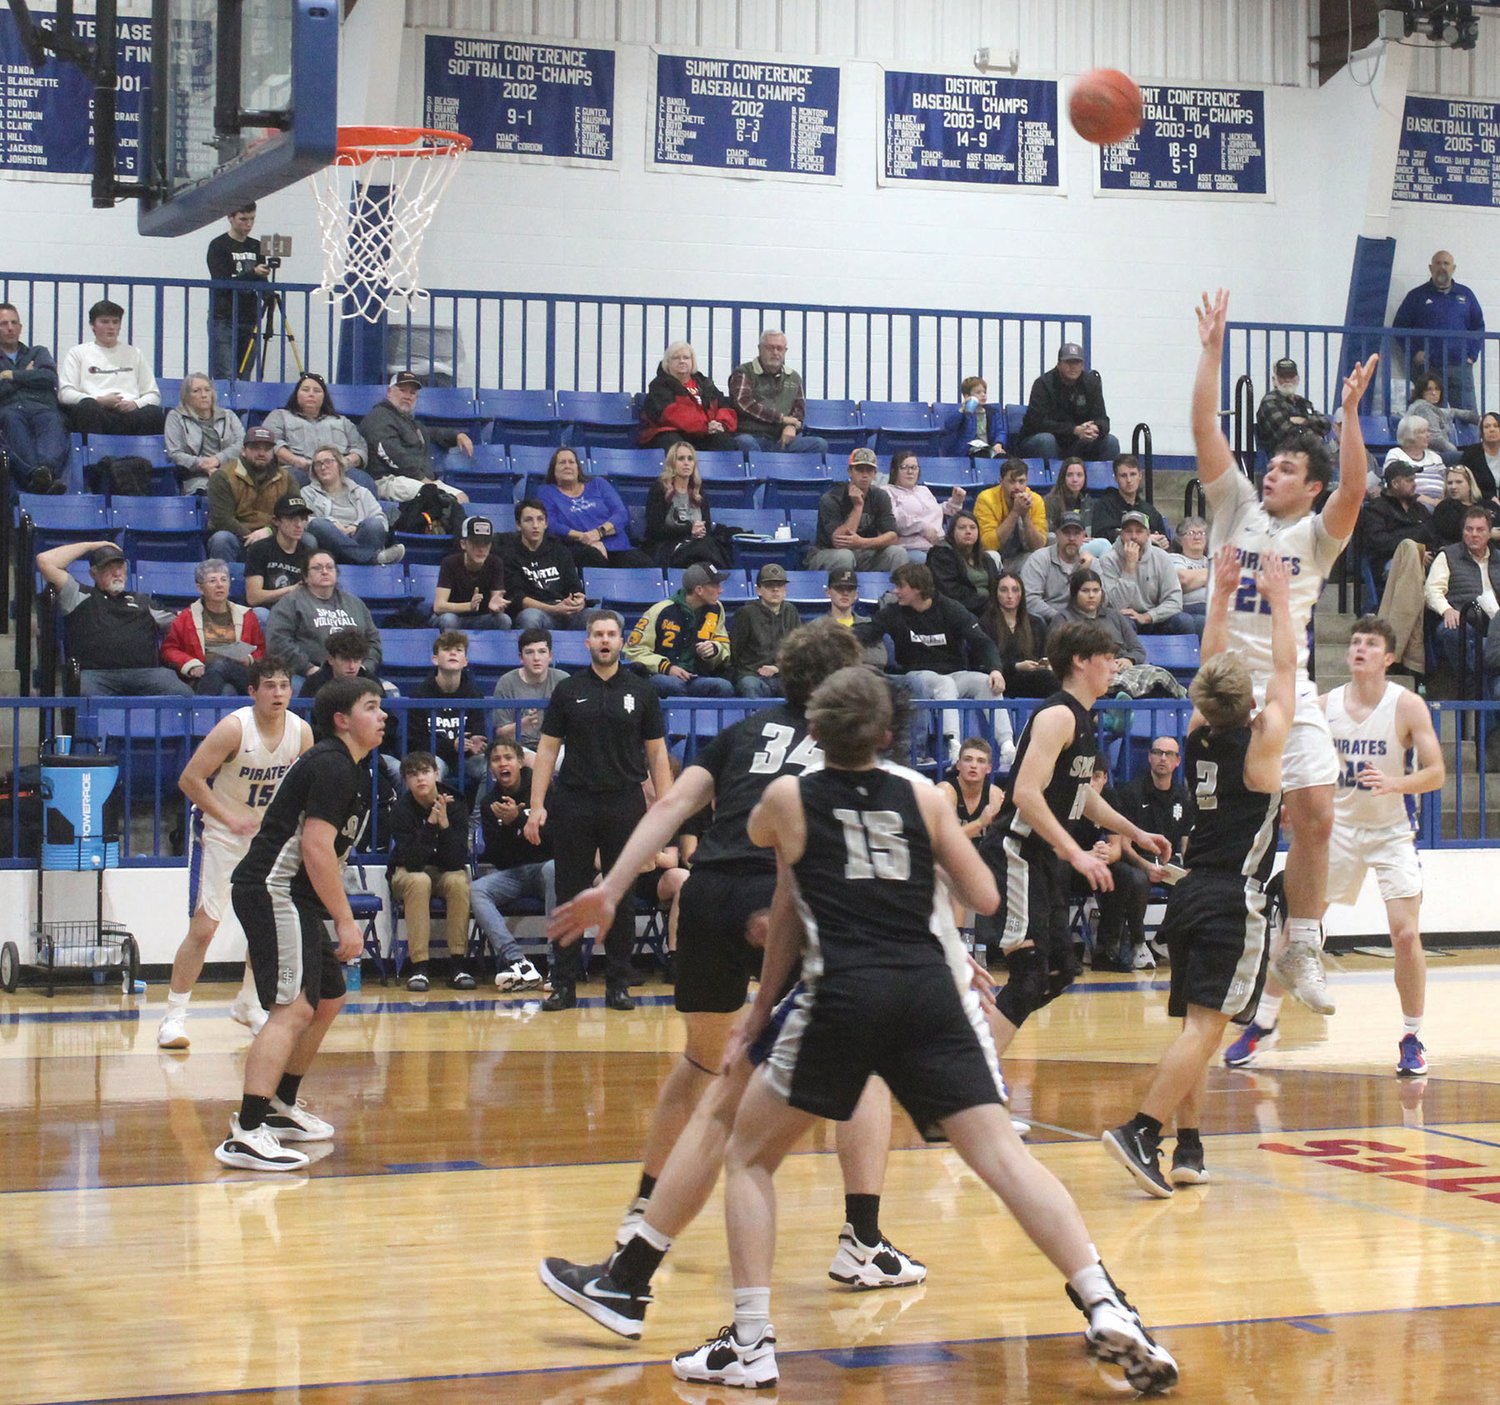 Norwood’s Gavin McGraw puts up a shot in the season opener against Sparta.